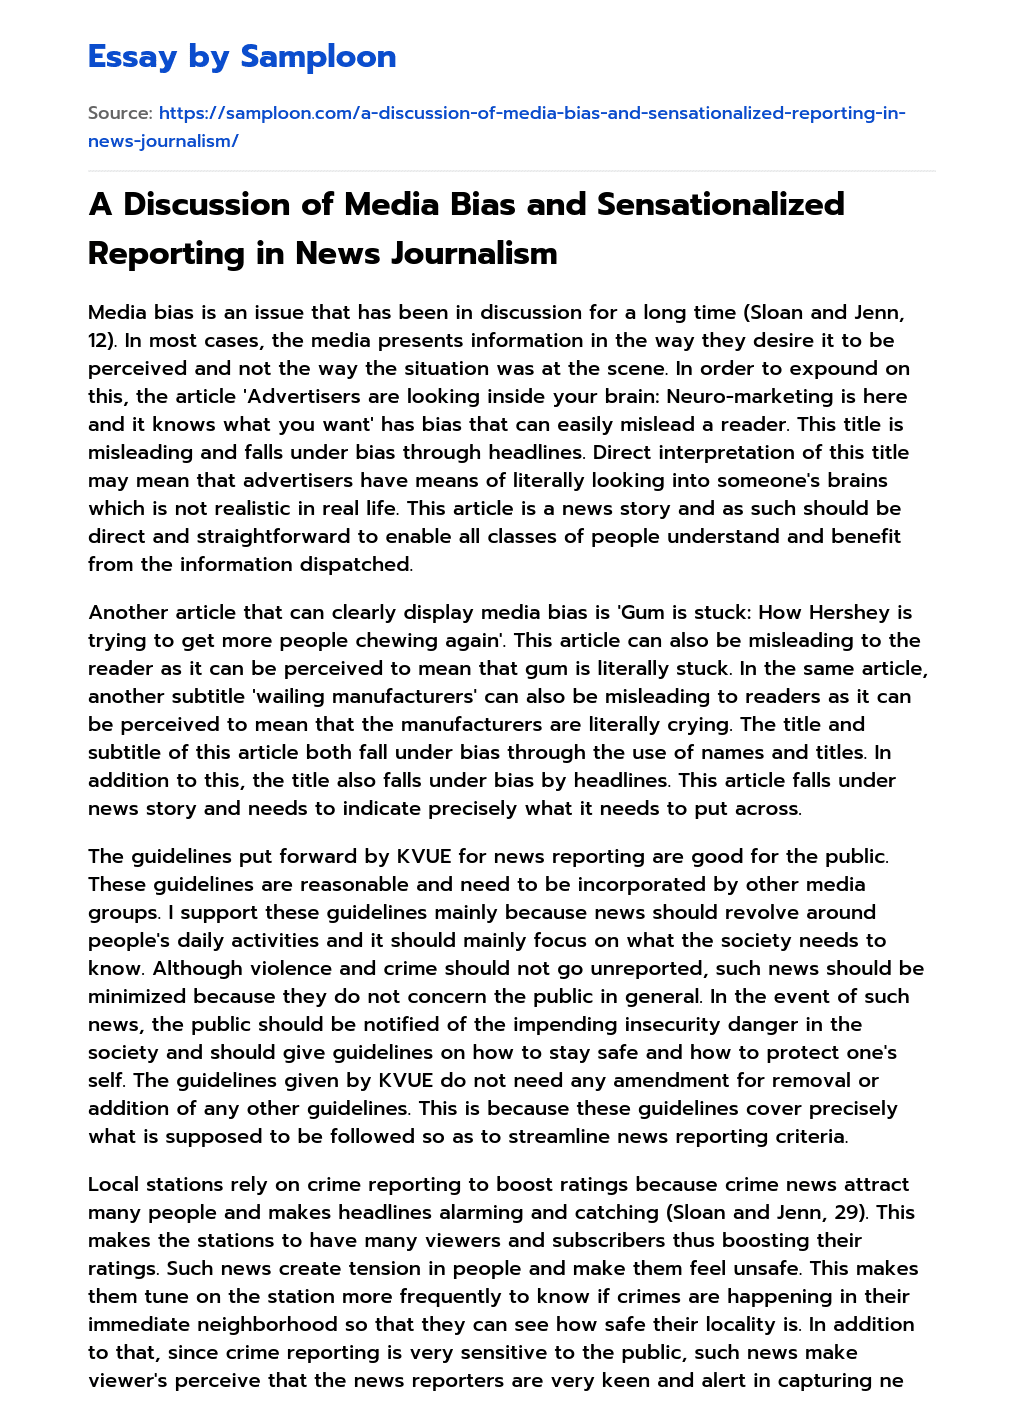 A Discussion of Media Bias and Sensationalized Reporting in News Journalism essay